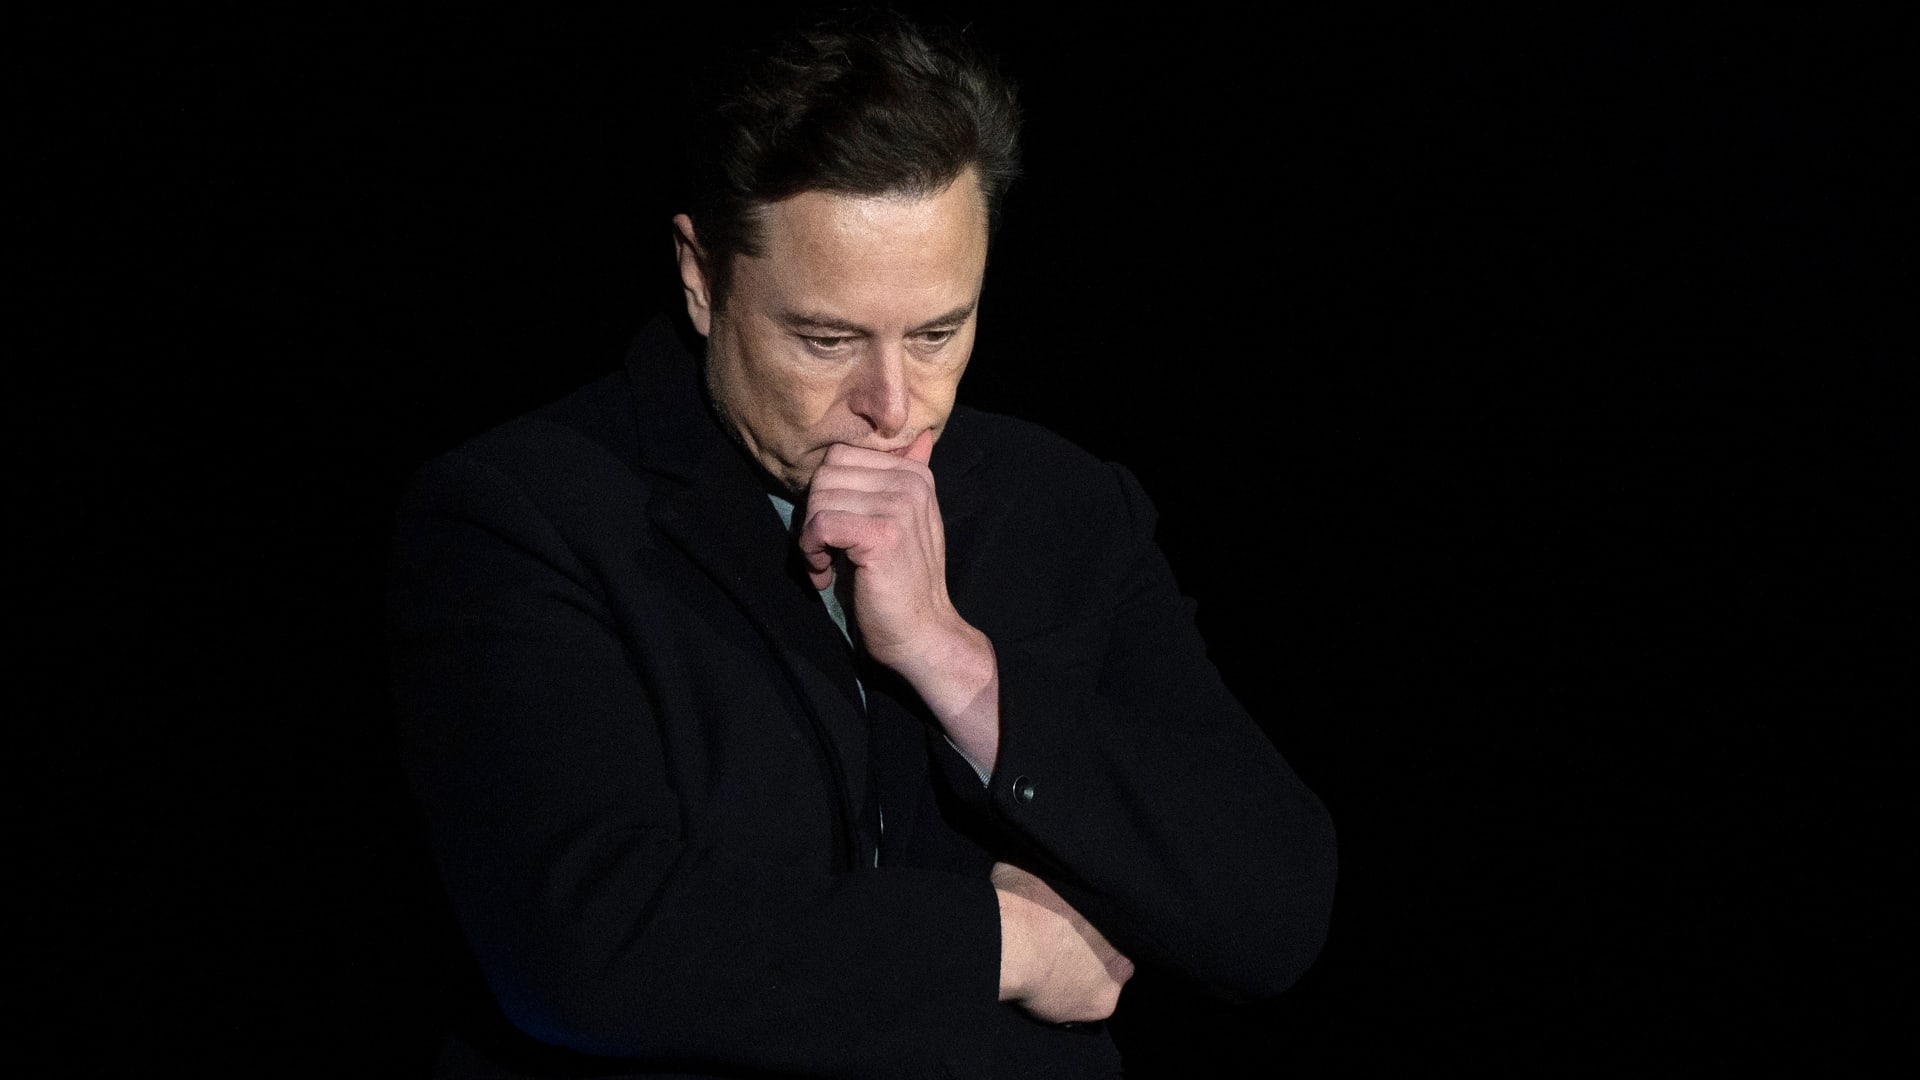 Elon Musk had a bad week at Tesla, SpaceX and Twitter